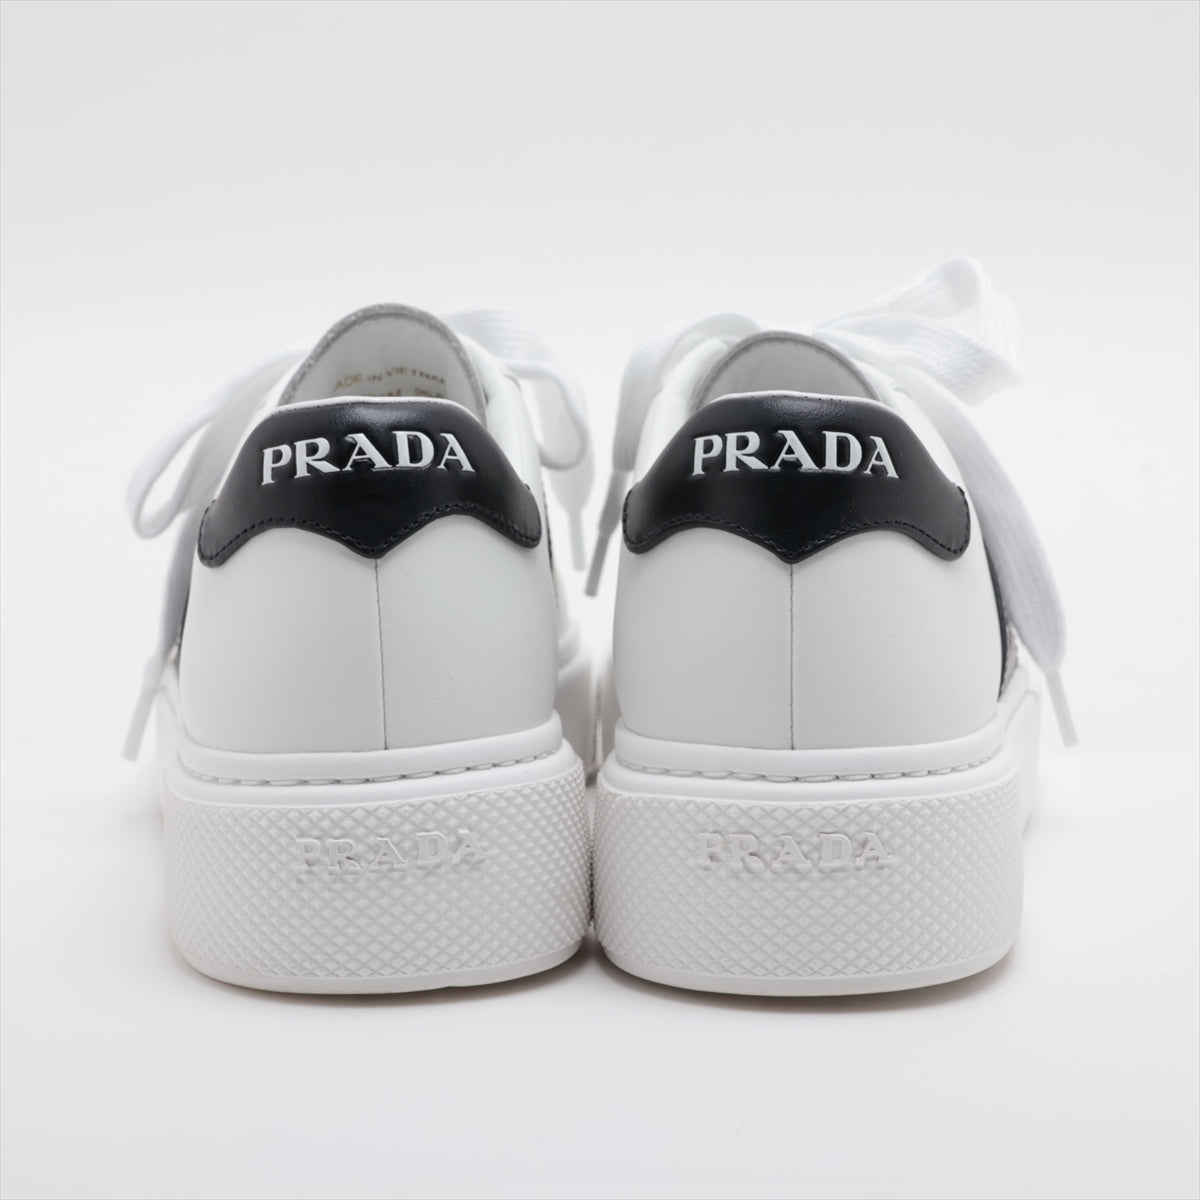 Prada Sport Leather Sneakers 36.5 Ladies' Black × White 1E223M There is a box